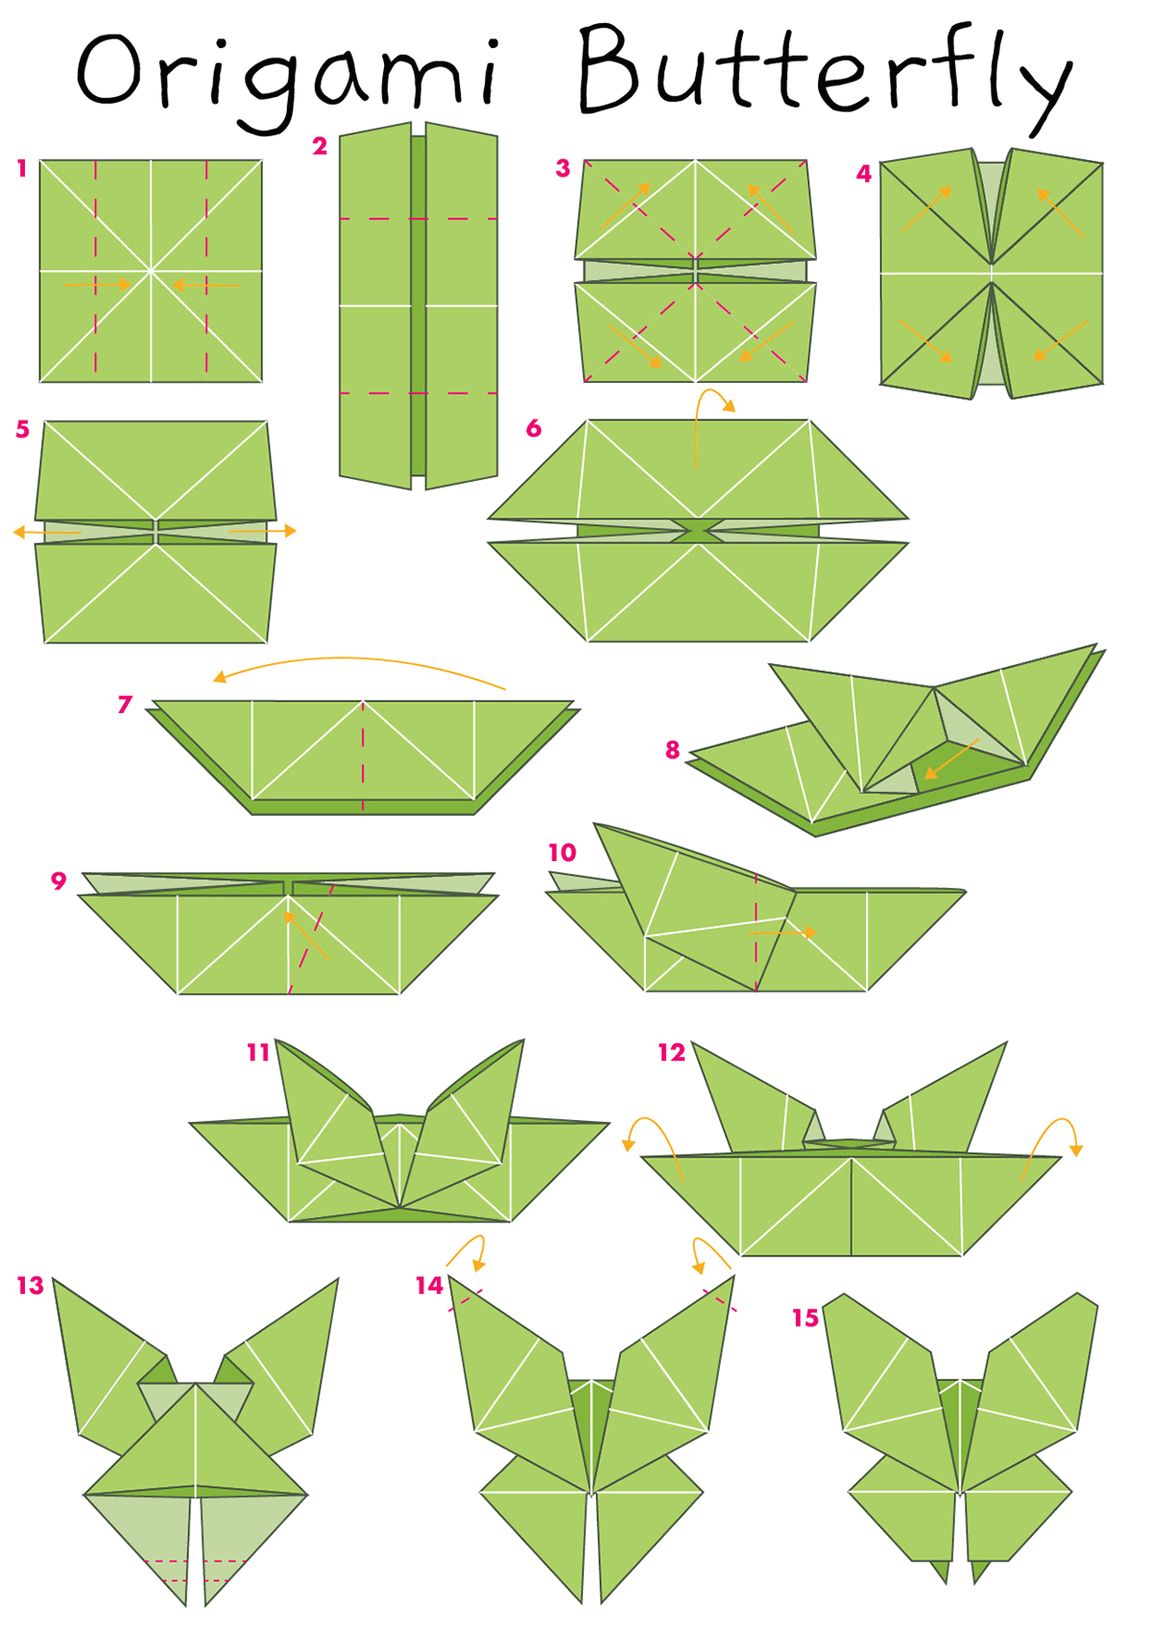 Origami butterfly instructions